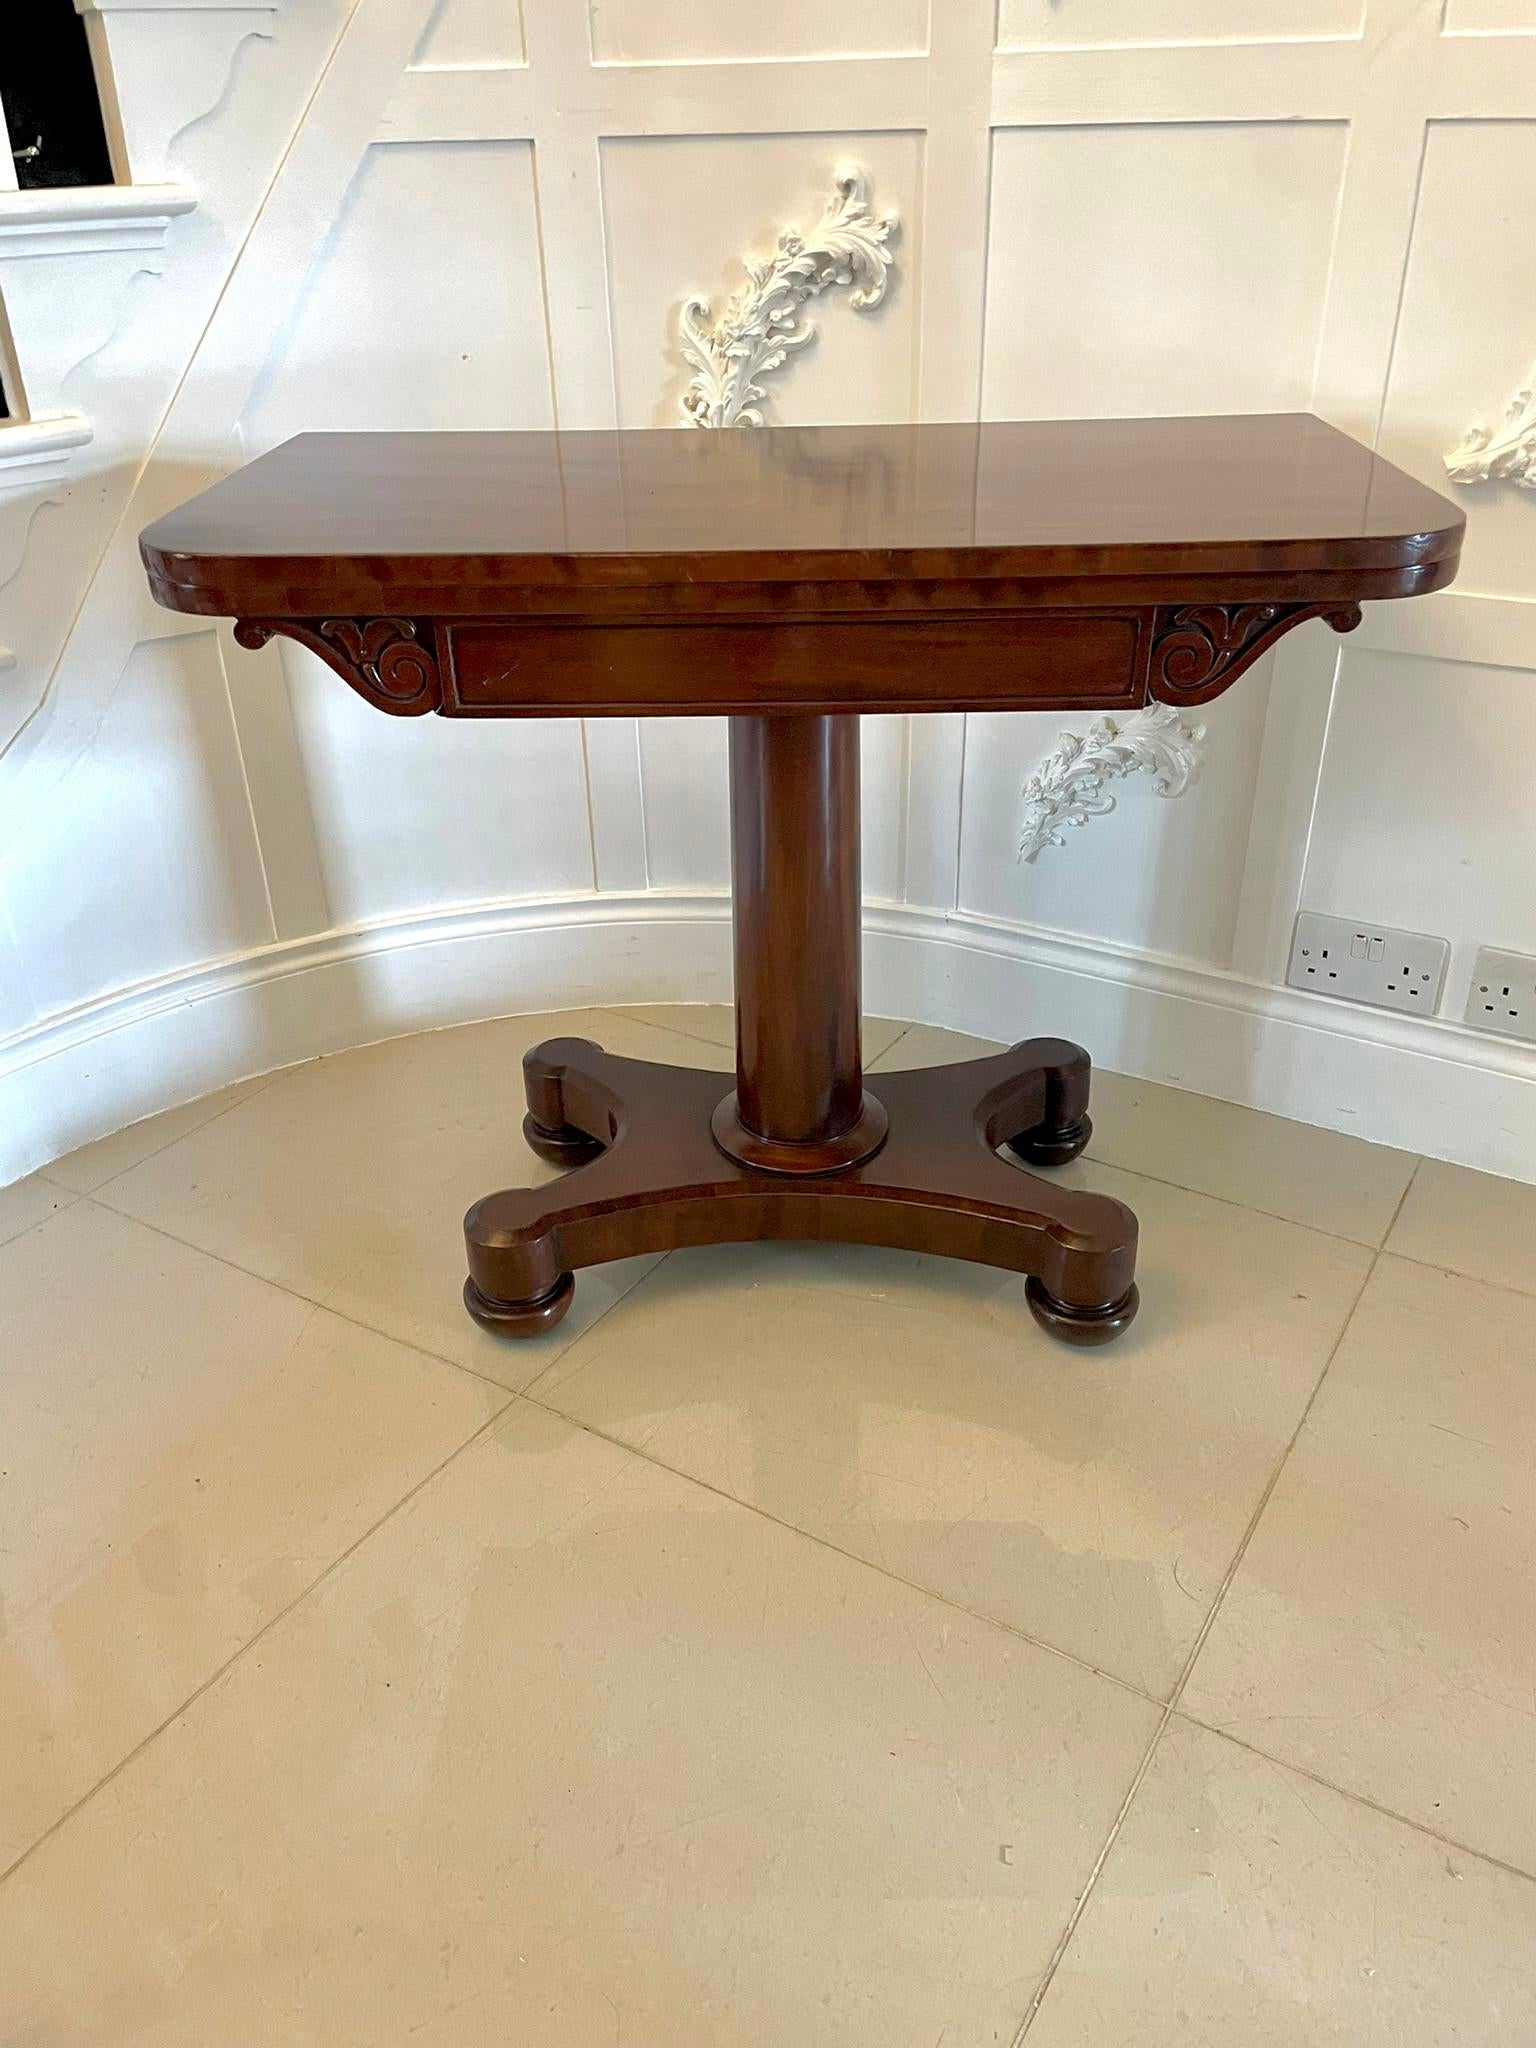 Quality 19th century Victorian antique mahogany card/side table having a lovely mahogany top that lifts up and swivels to reveal a green baize interior, carved frieze supported by a round pedestal finishing on a quatrefoil base with turned feet. It